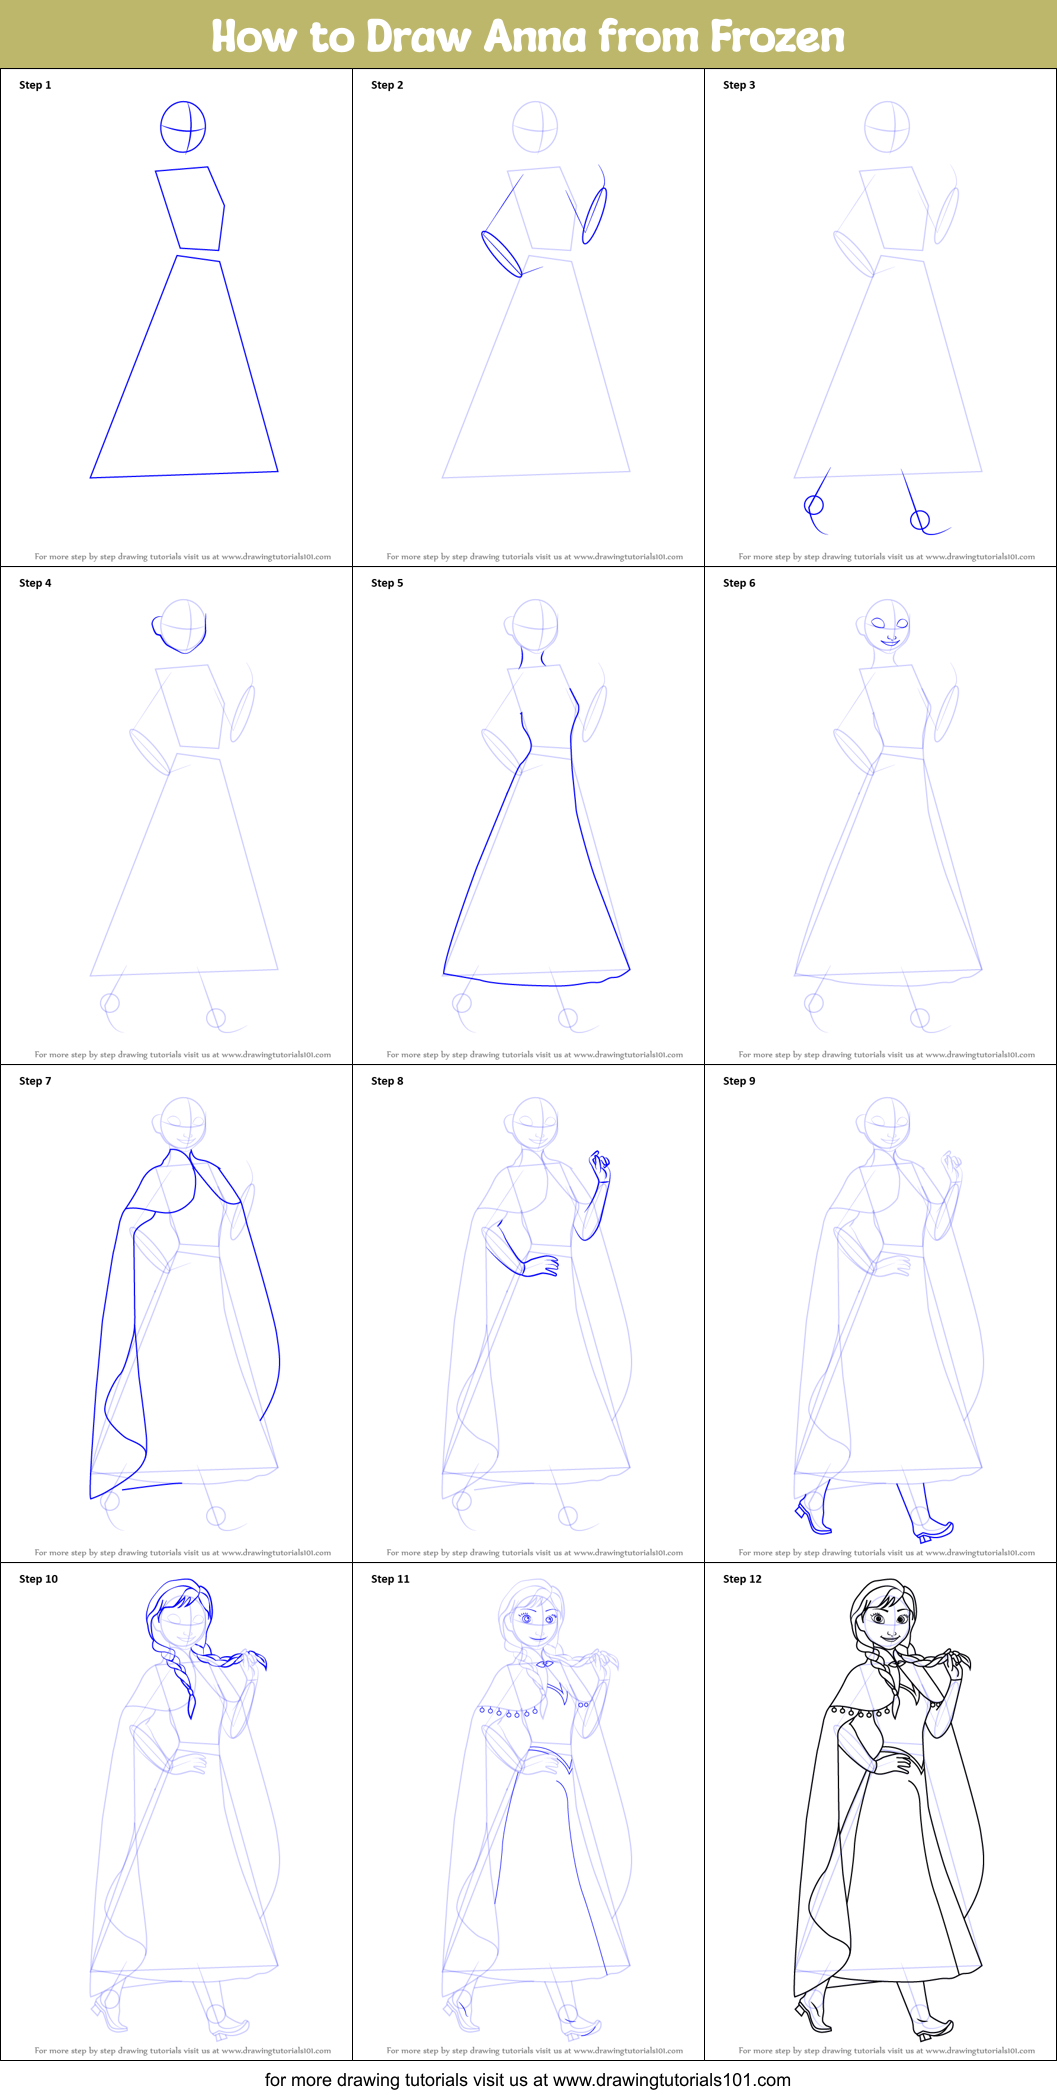 How to Draw Anna from Frozen printable step by step drawing sheet